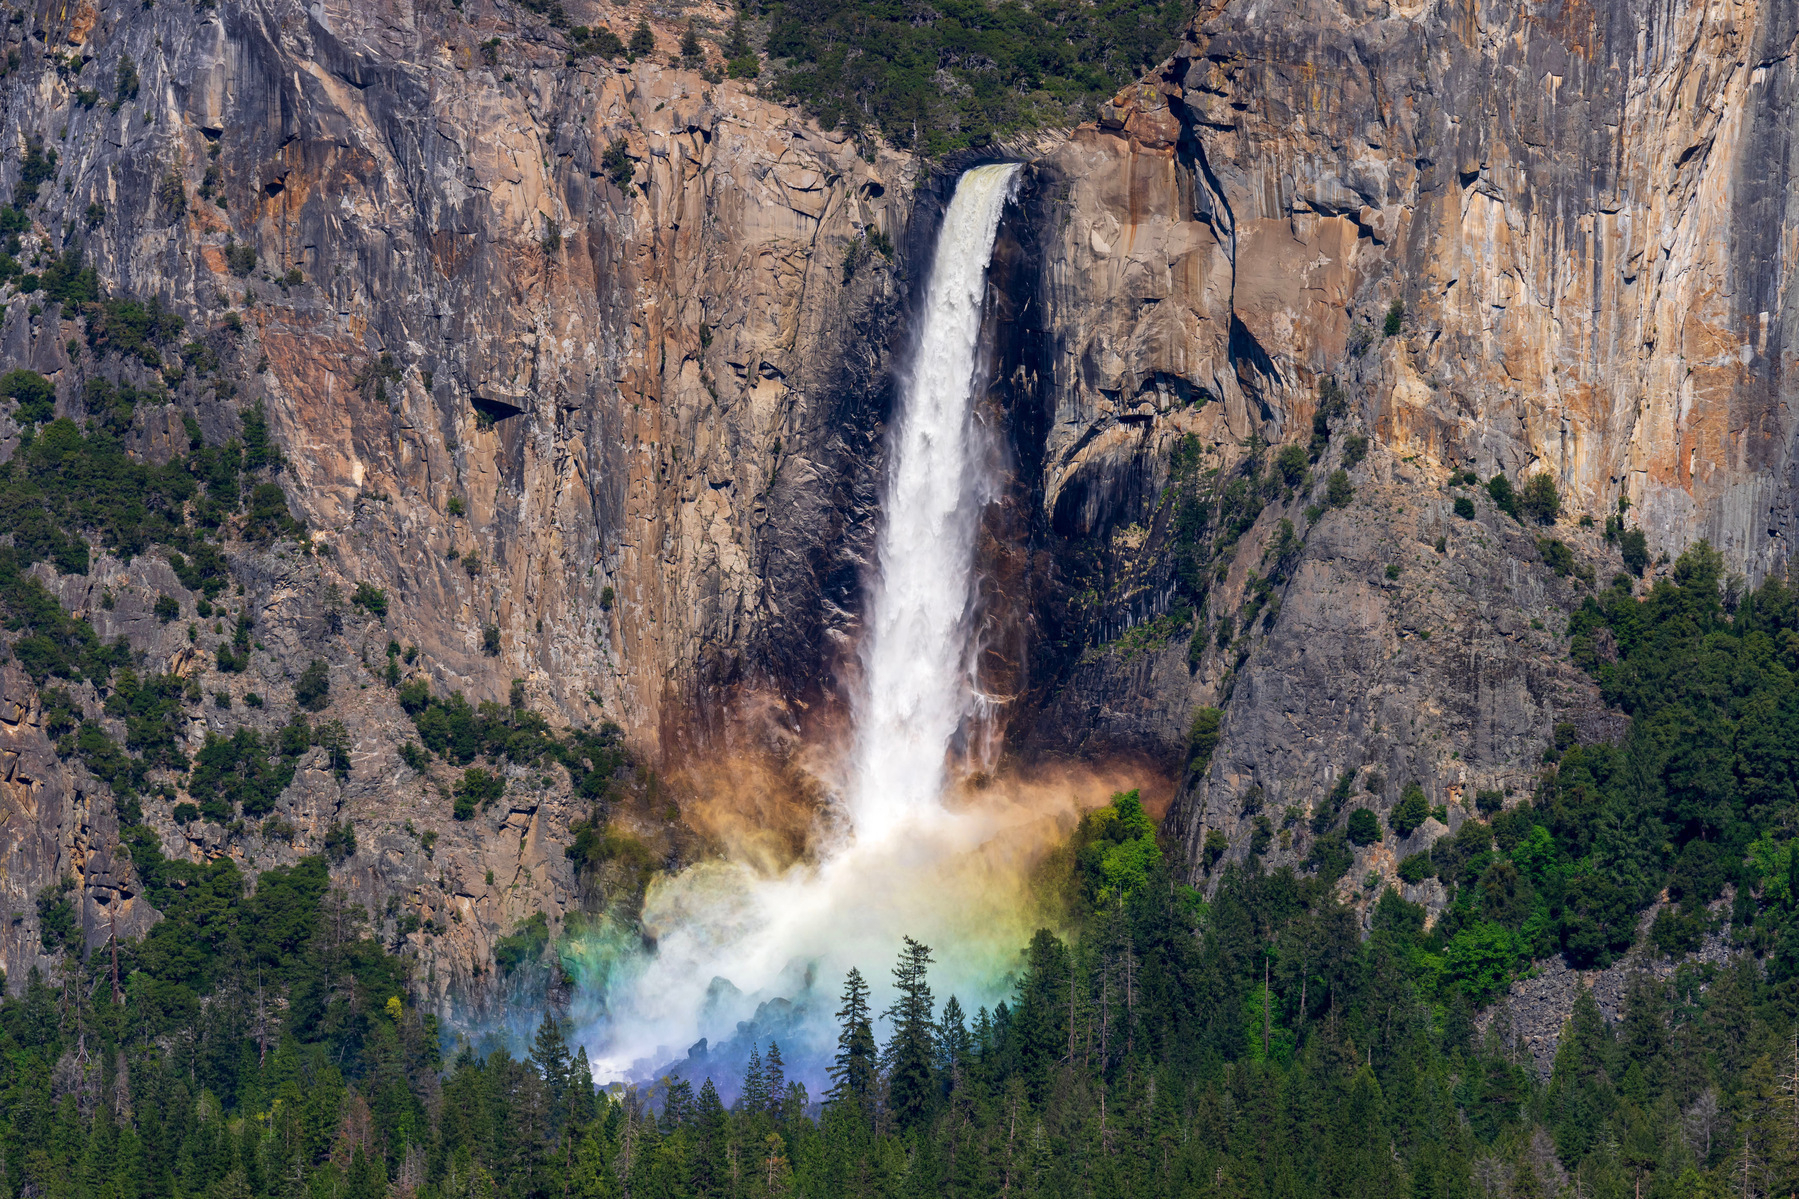 A waterfall pours over the lip of a cliff, crashing down onto rocks below, surrounded by trees. Where the water lands, a large spray of mist is illuminated by the setting sun, creating a rainbow effect throughout the mist.